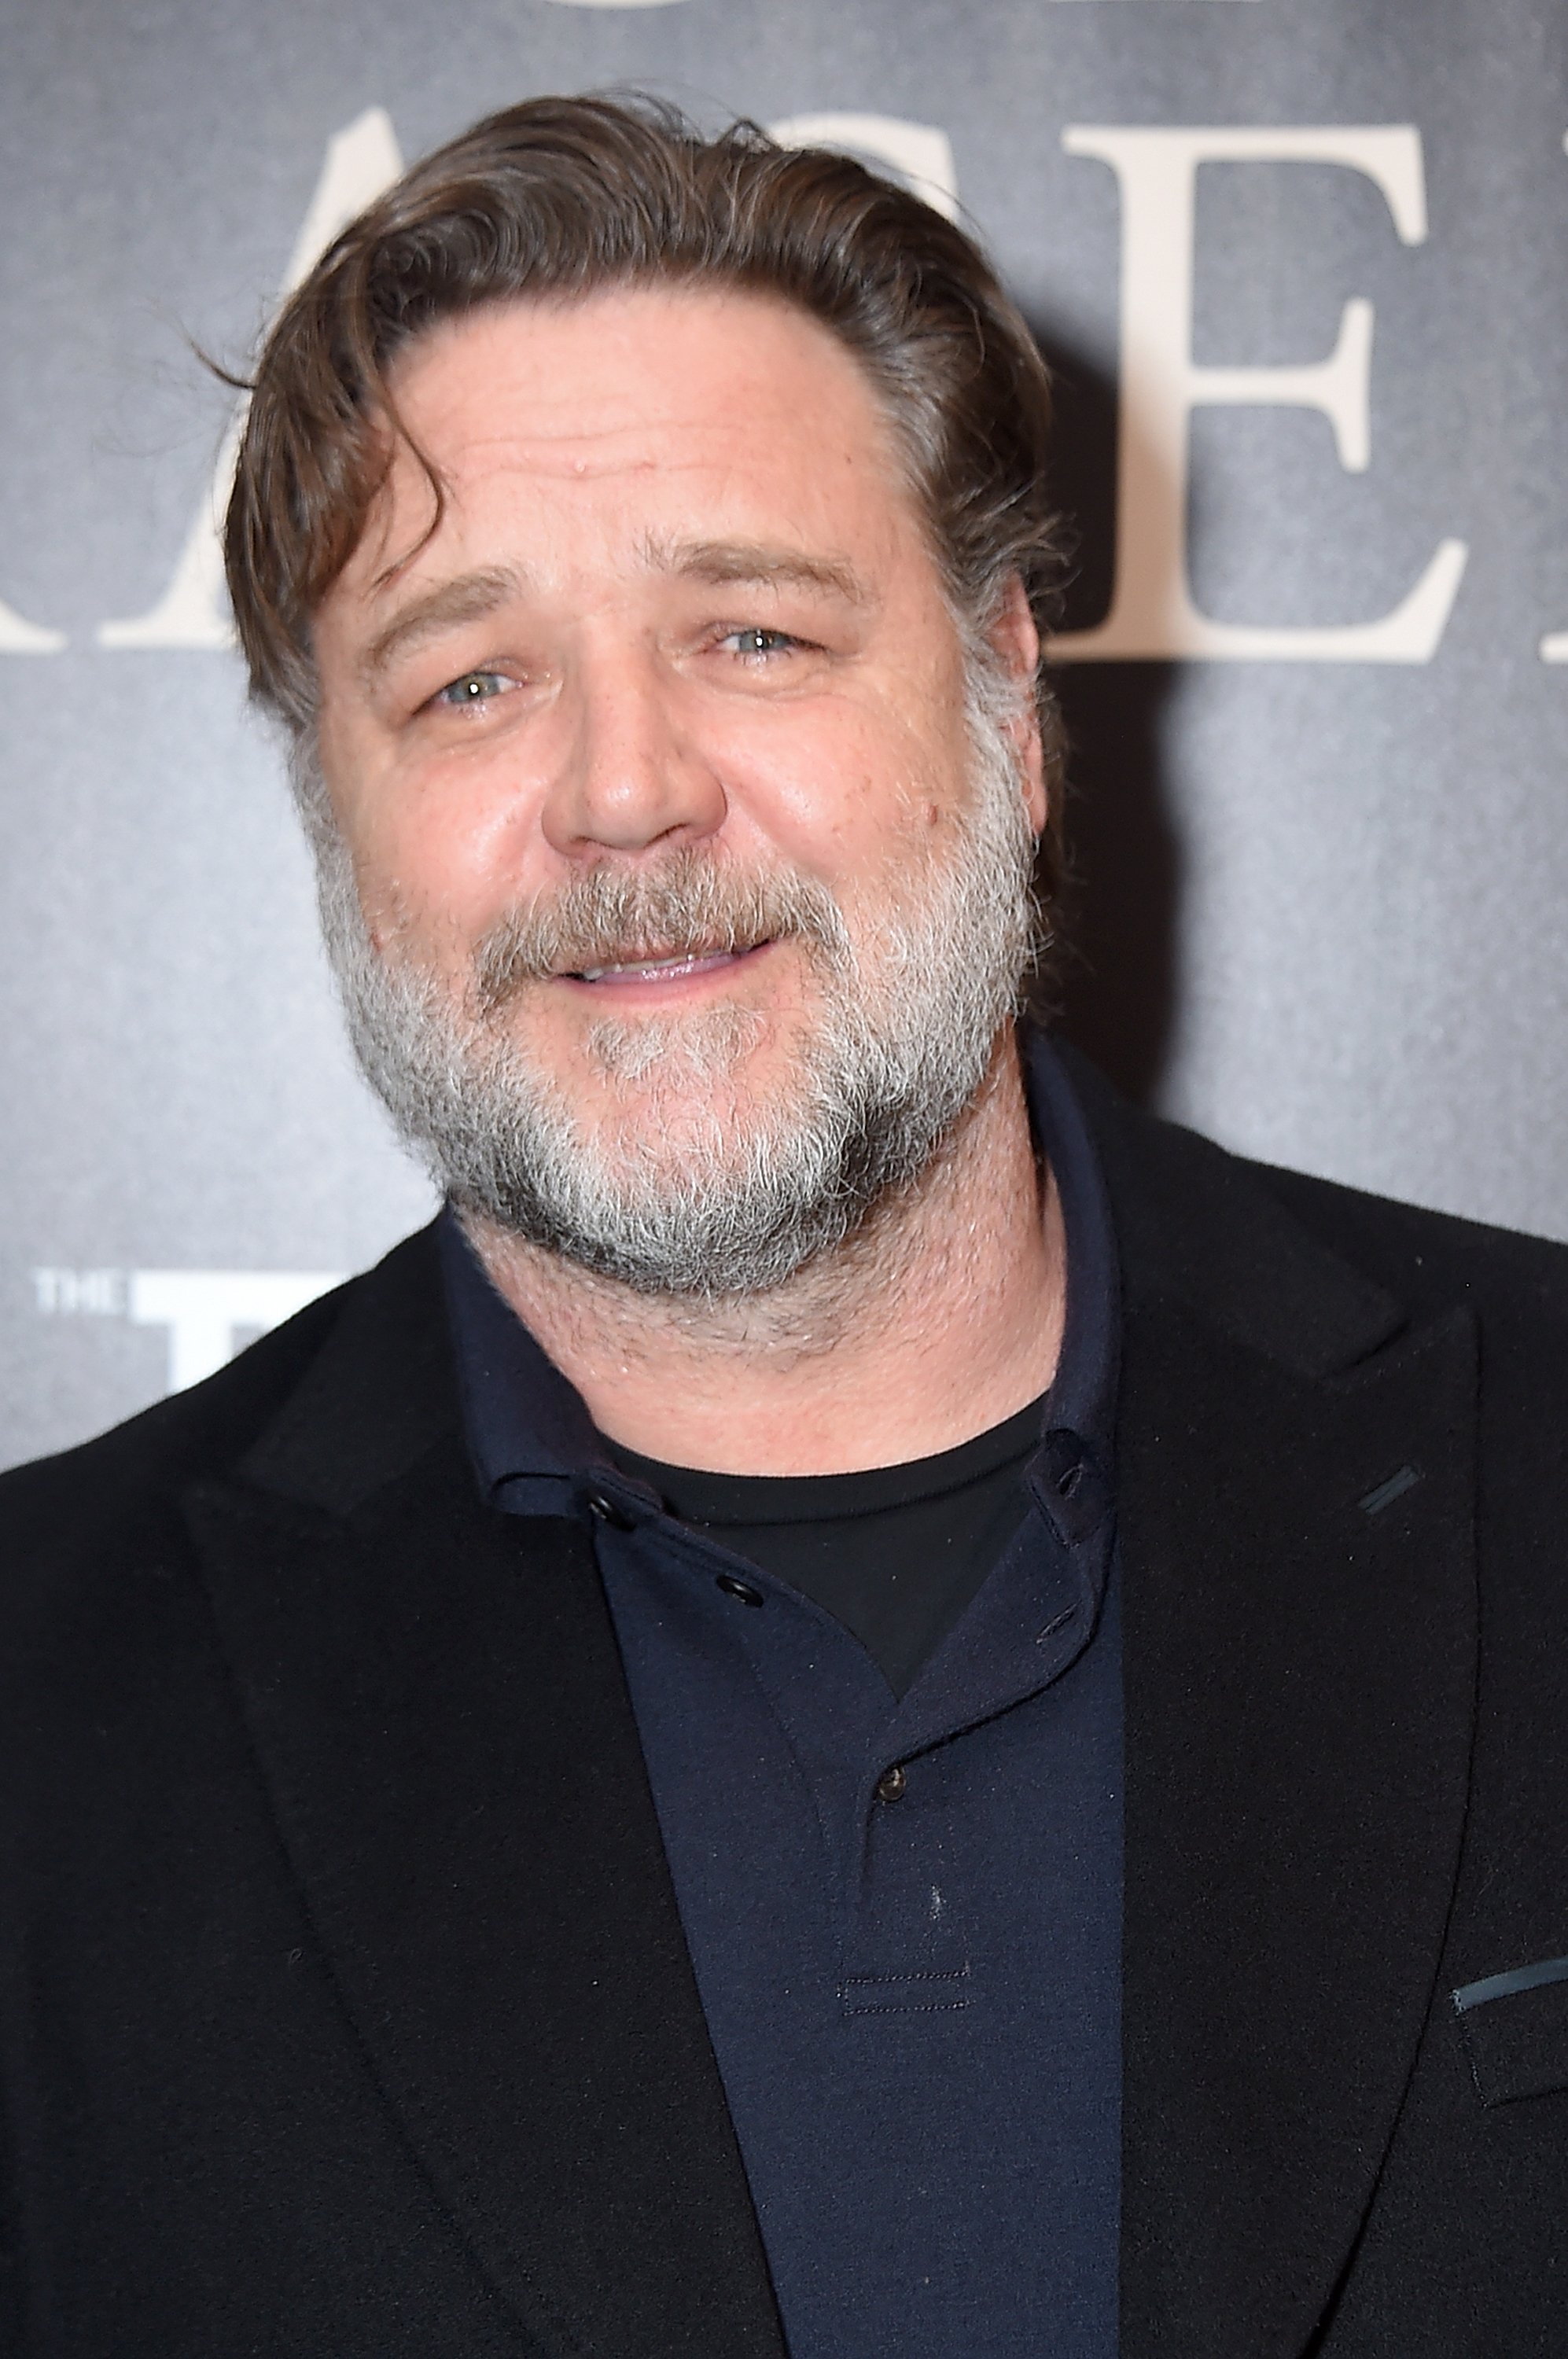 Russell Crowe attends the New York "Boy Erased" screening at the Whitby Hotel on October 22, 2018, in New York City. | Source: Getty Images